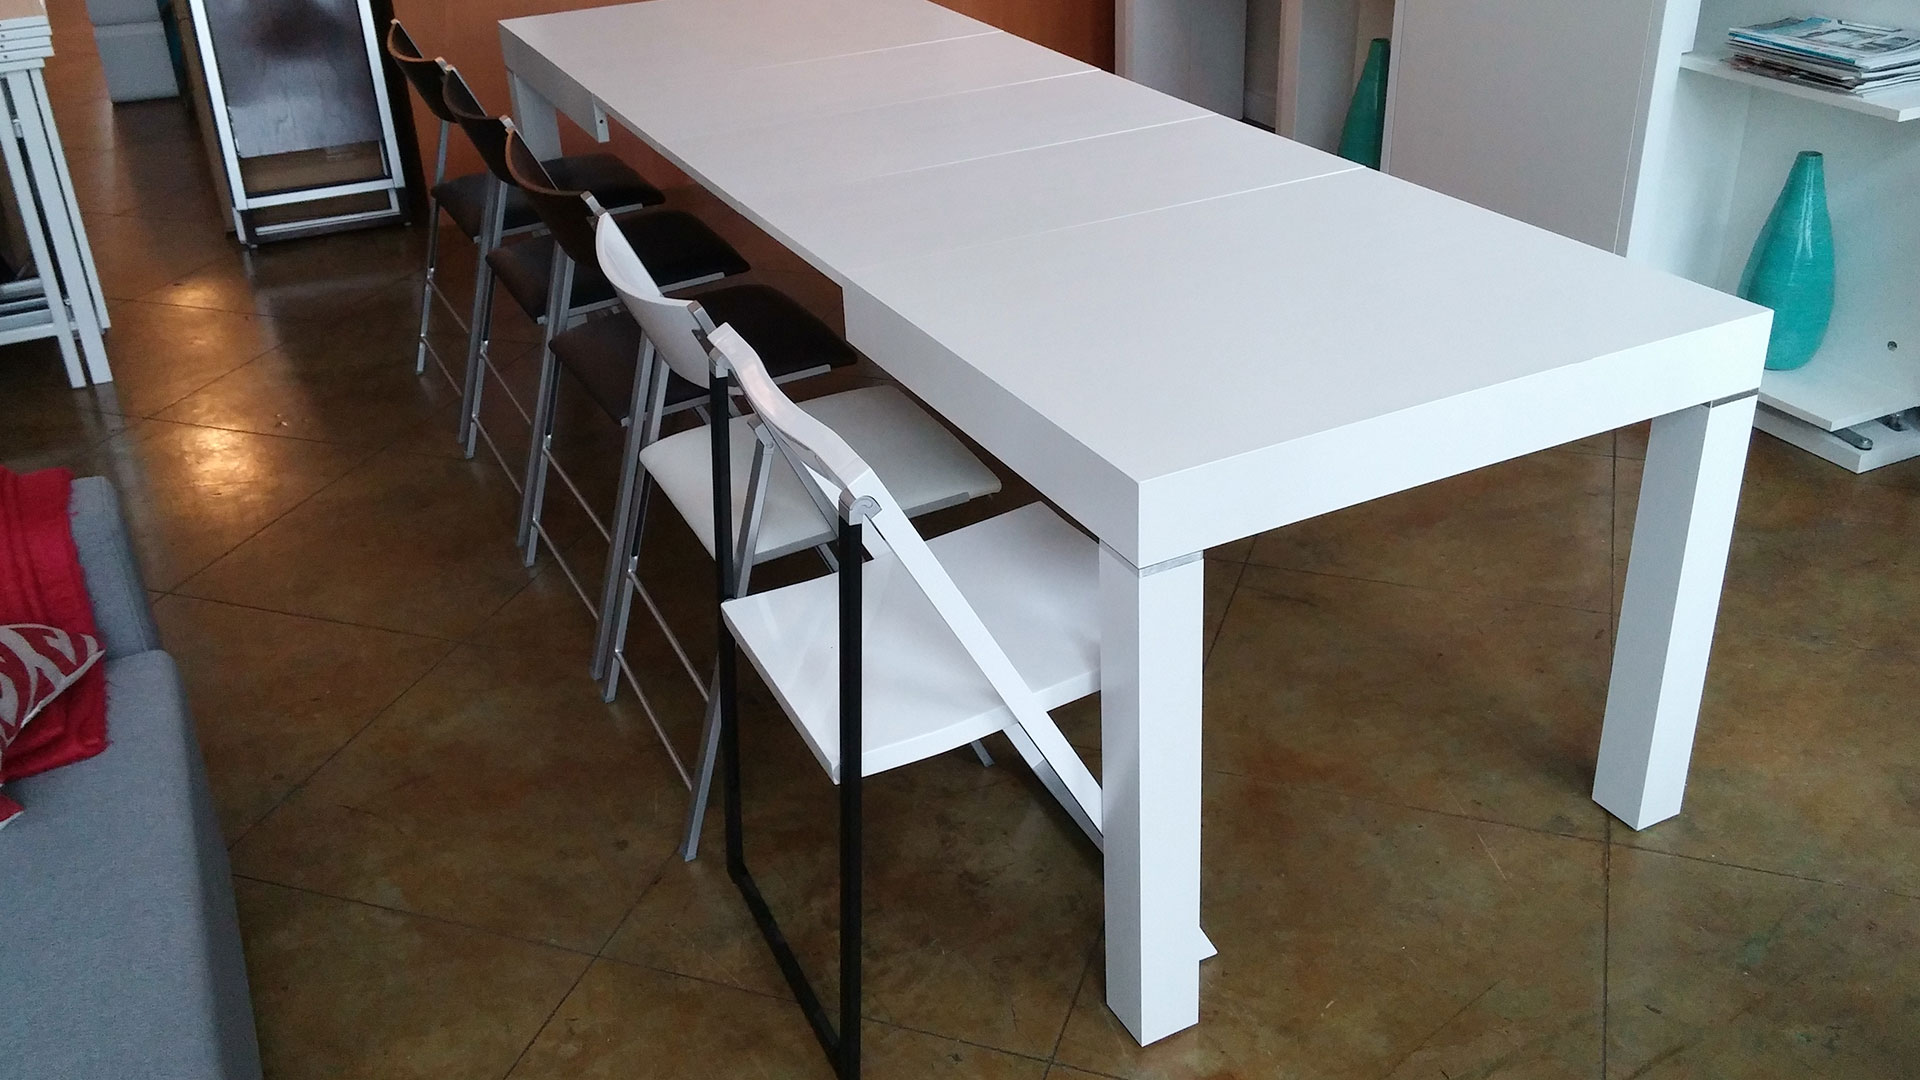 Dining Room Tables That Extend To Seat 12